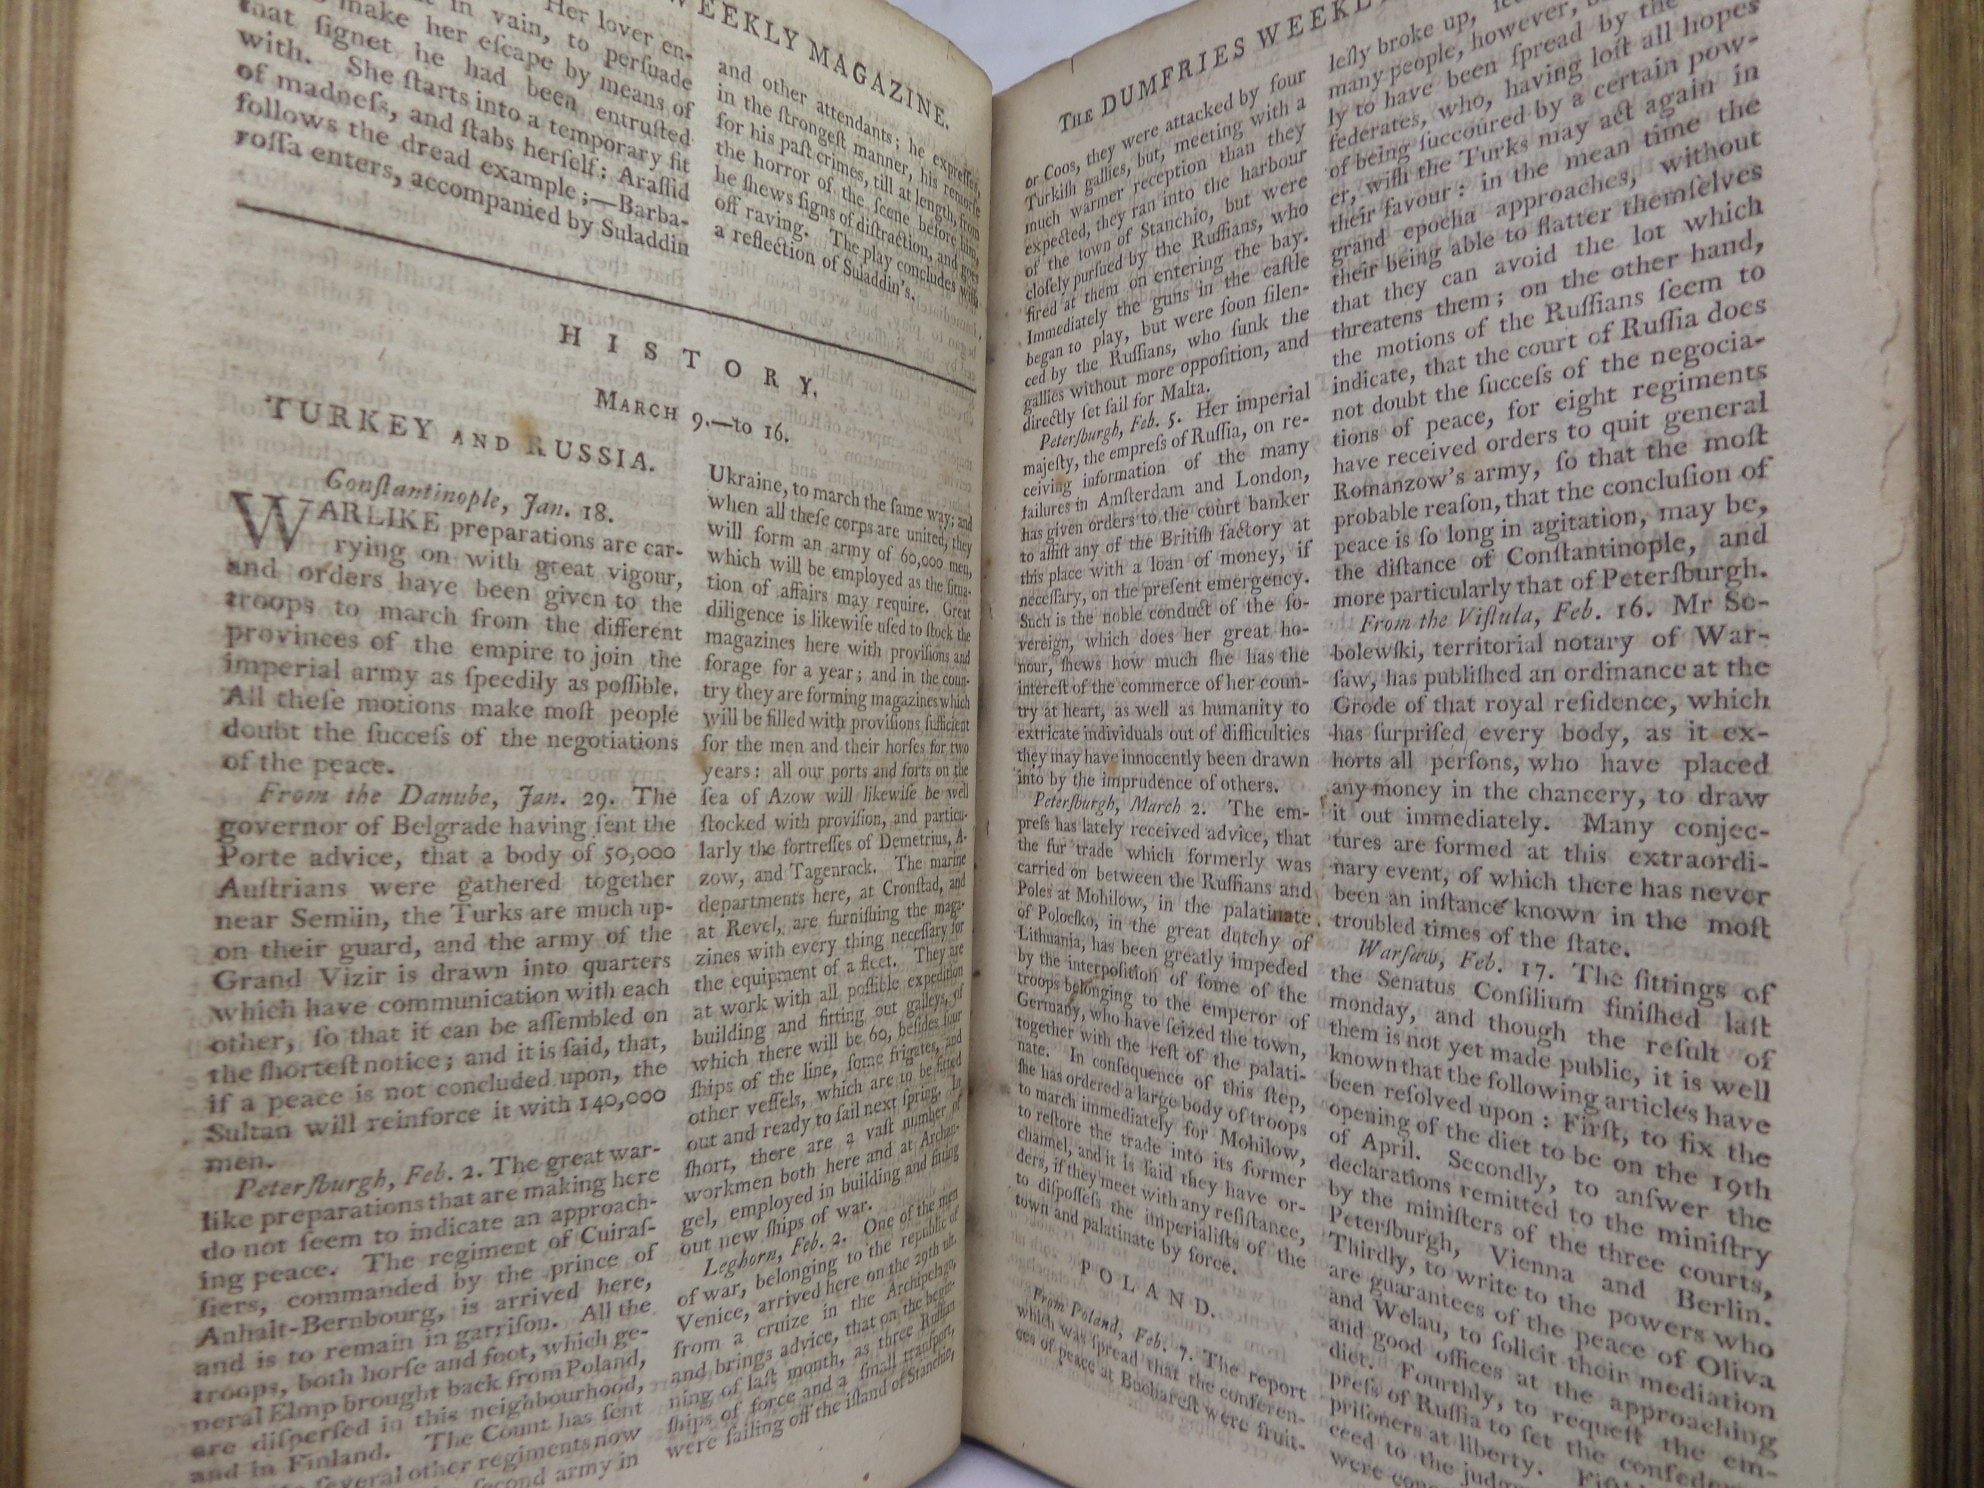 THE DUMFRIES WEEKLY MAGAZINE VOLUME ONE 1773 LEATHER BINDING